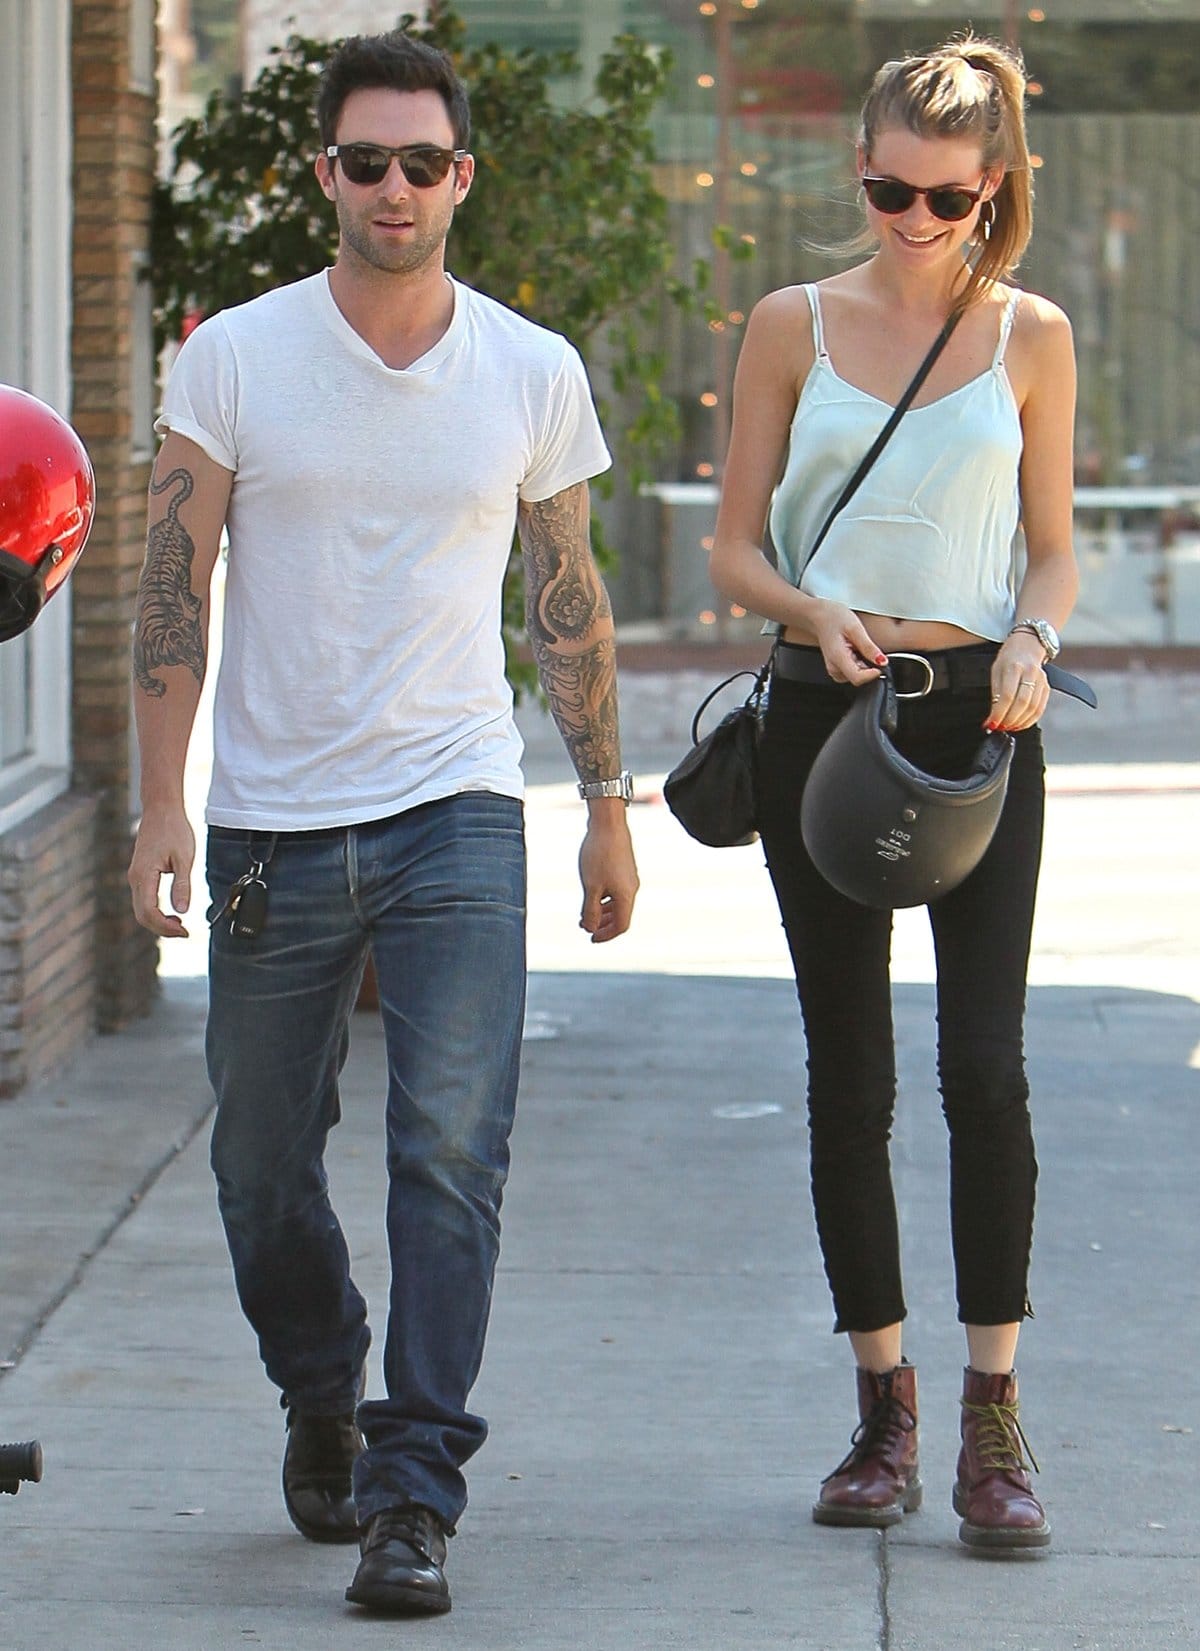 Behati Prinsloo started dating Adam Levine in May 2012 and married in Mexico on July 19, 2014